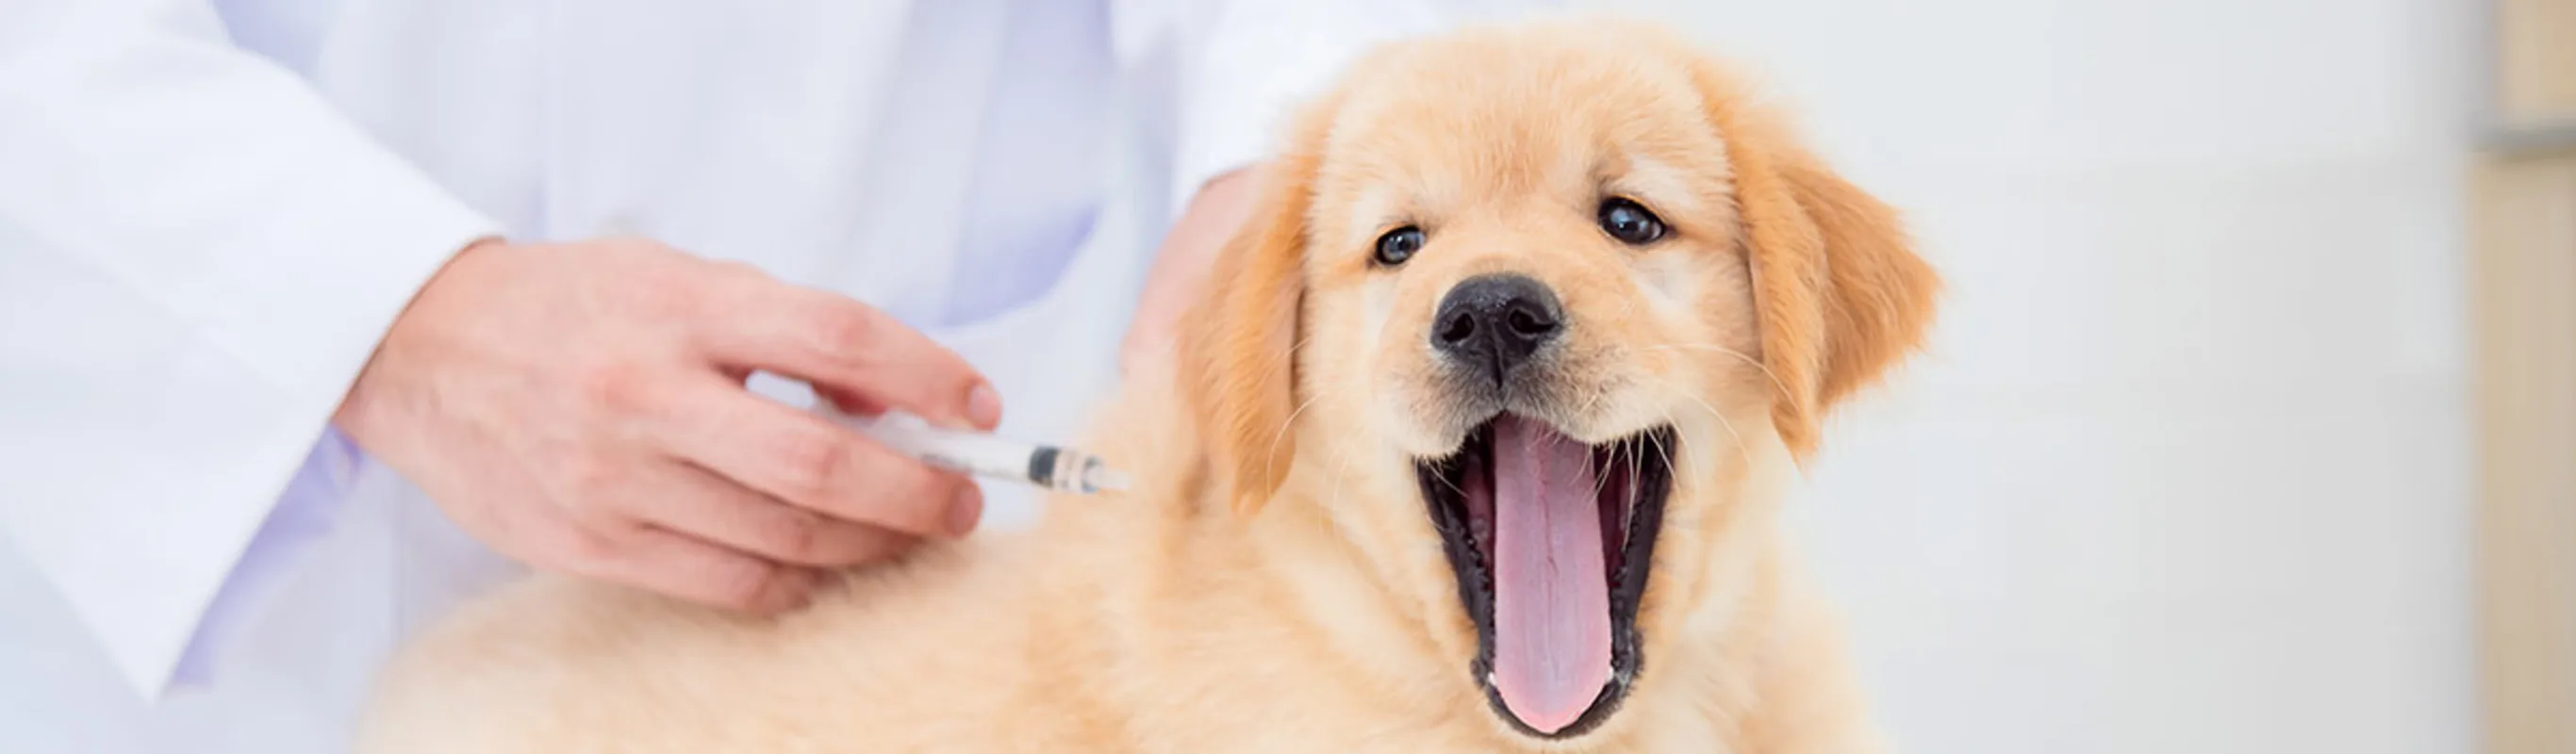 Labrador puppy getting a shot on clinic table from Veterinarian.